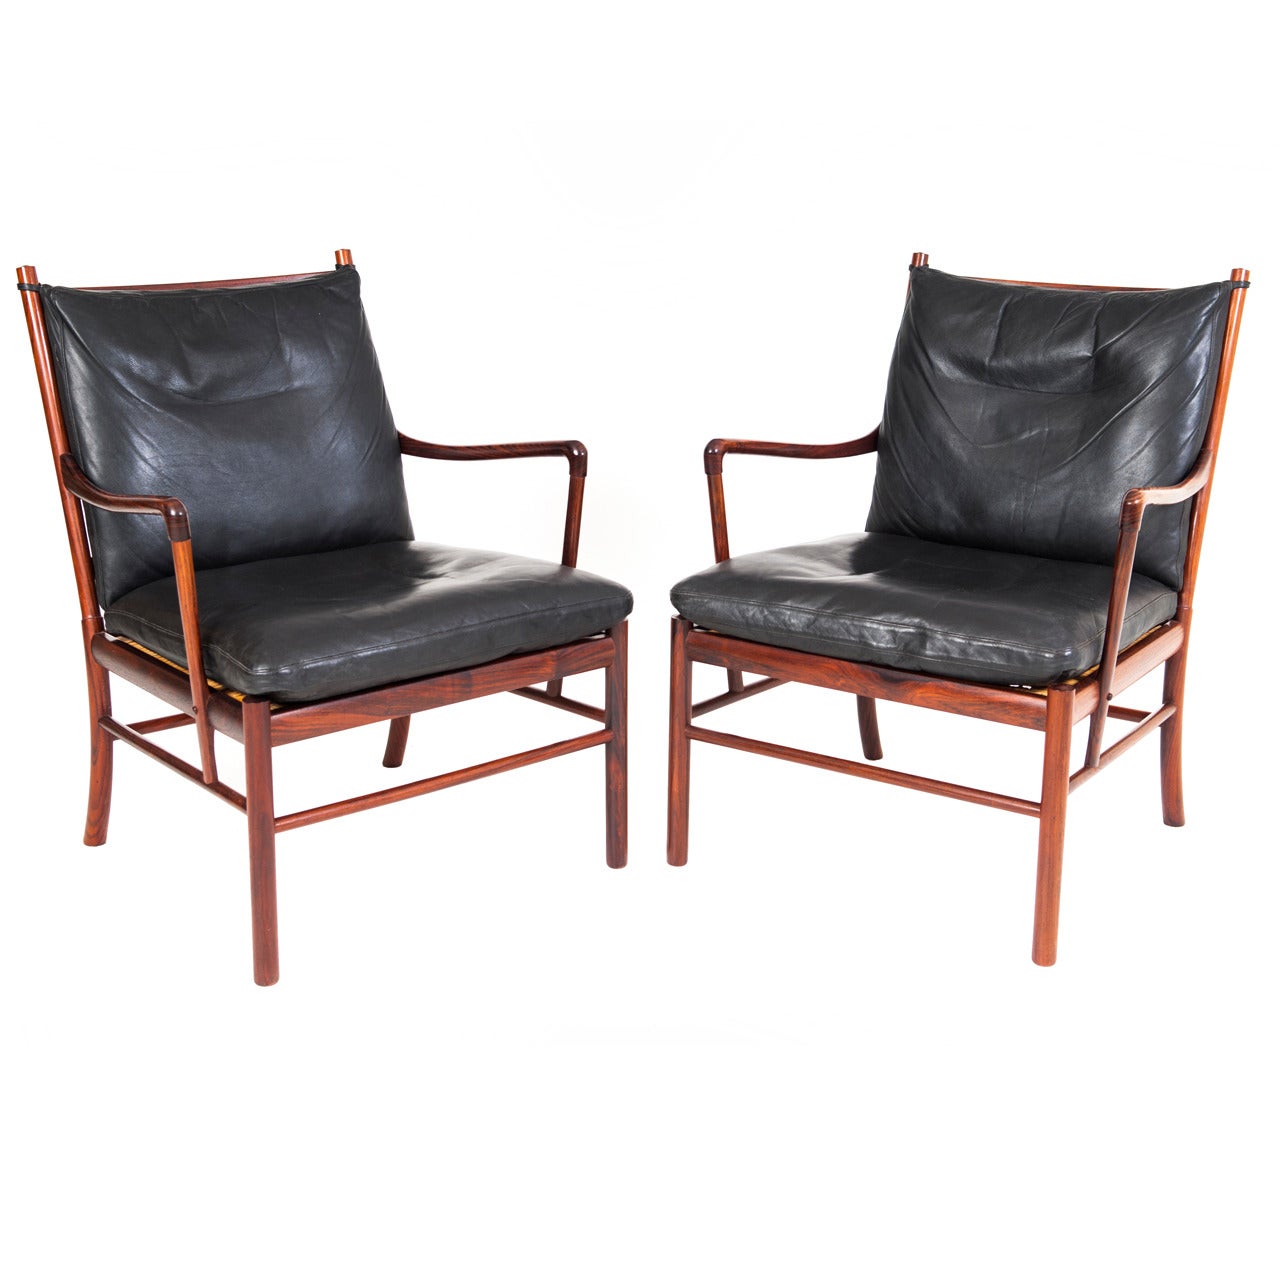 Ole Wanscher, Colonial Chairs